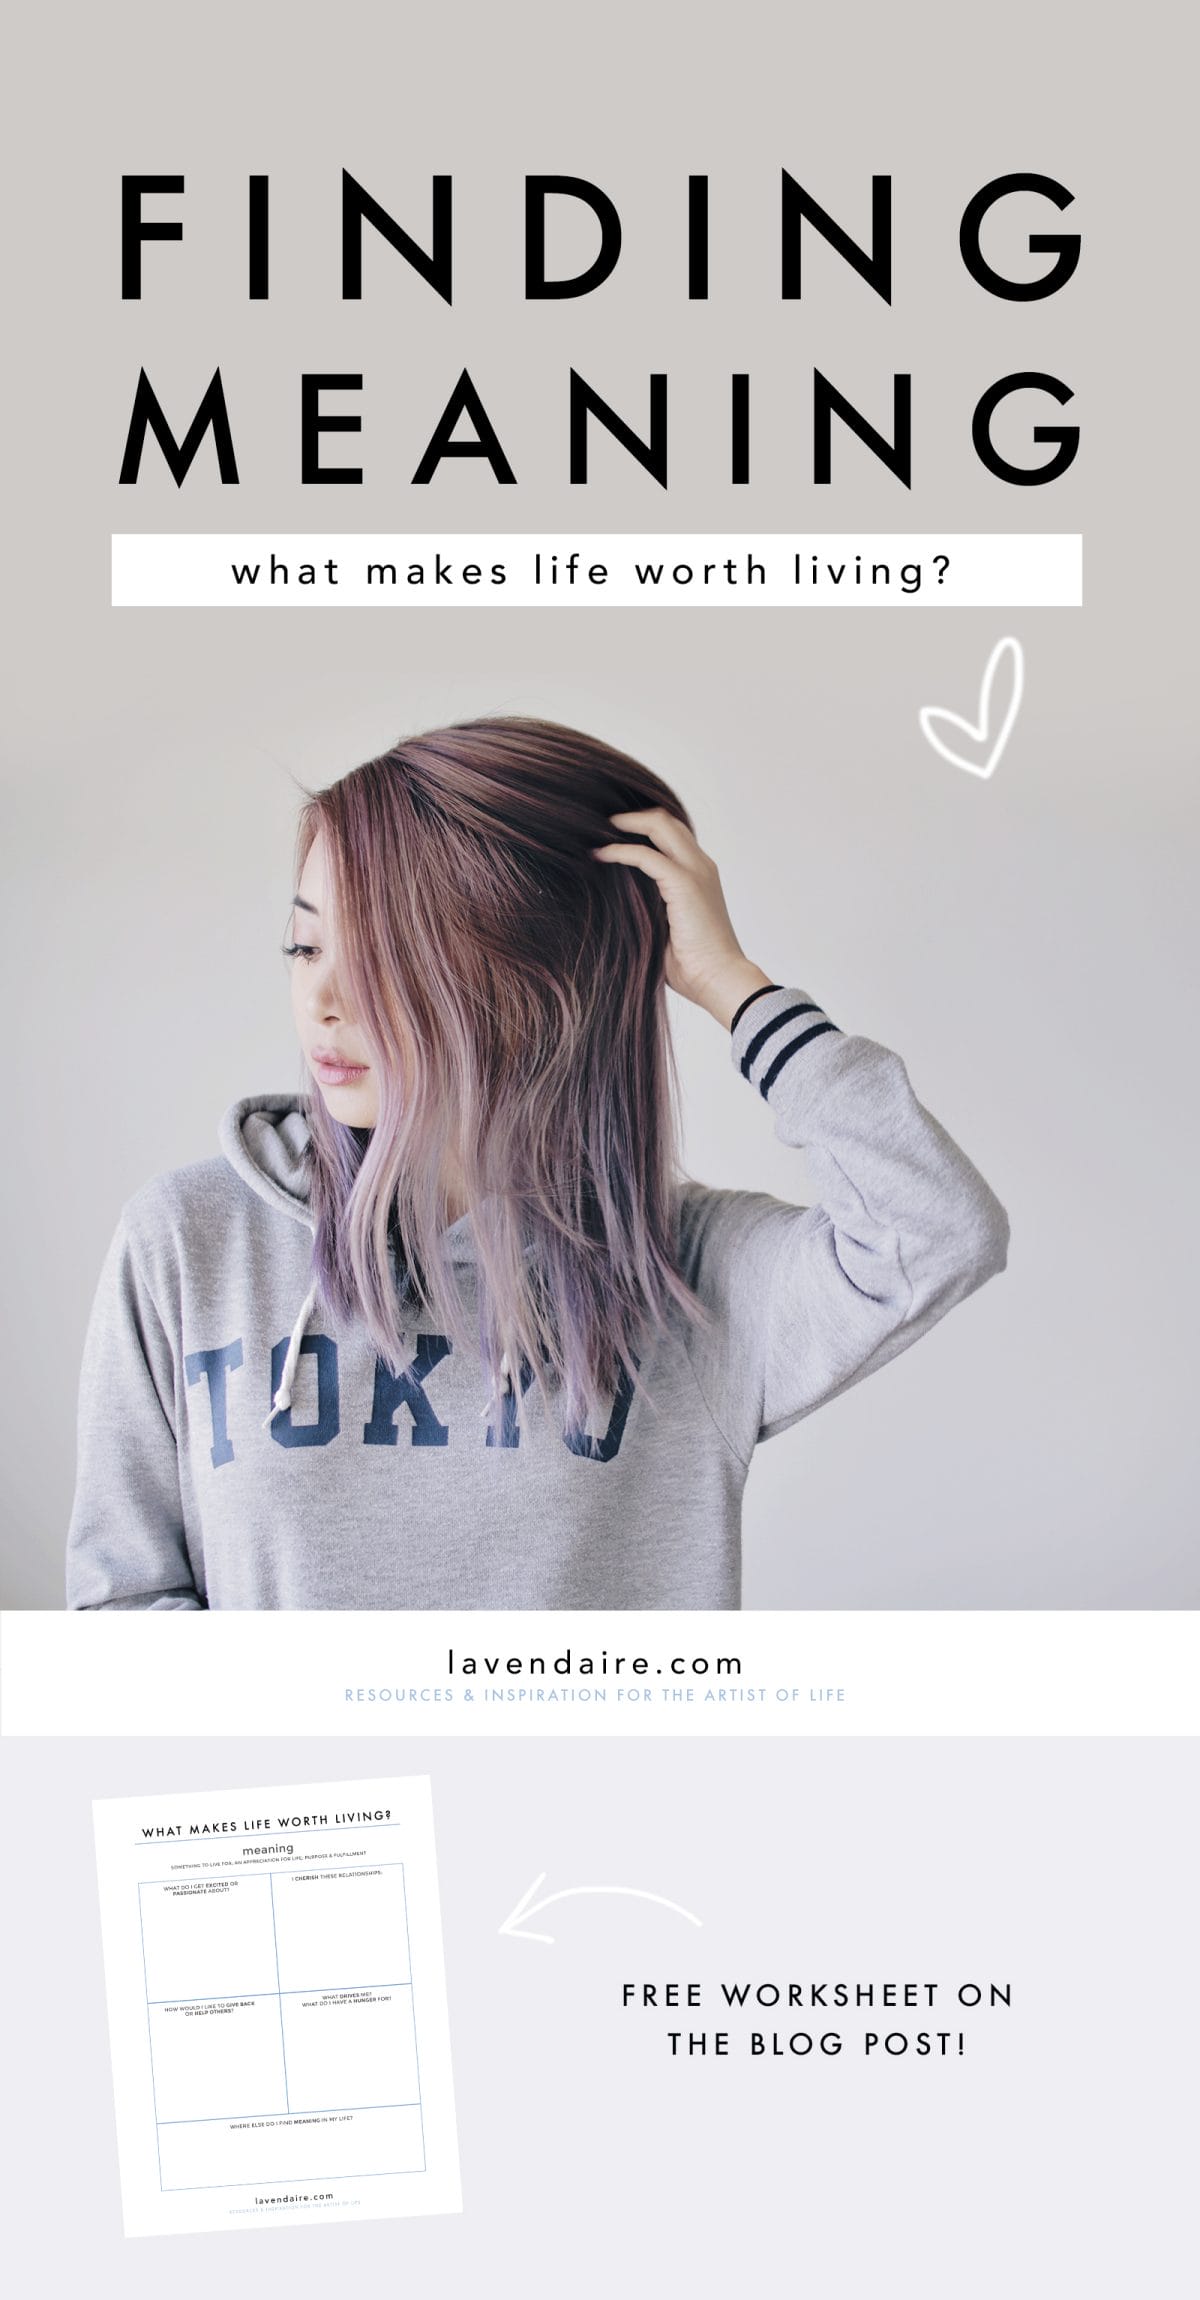 Free worksheet on finding meaning in life | lavendaire lifestyle design & personal growth